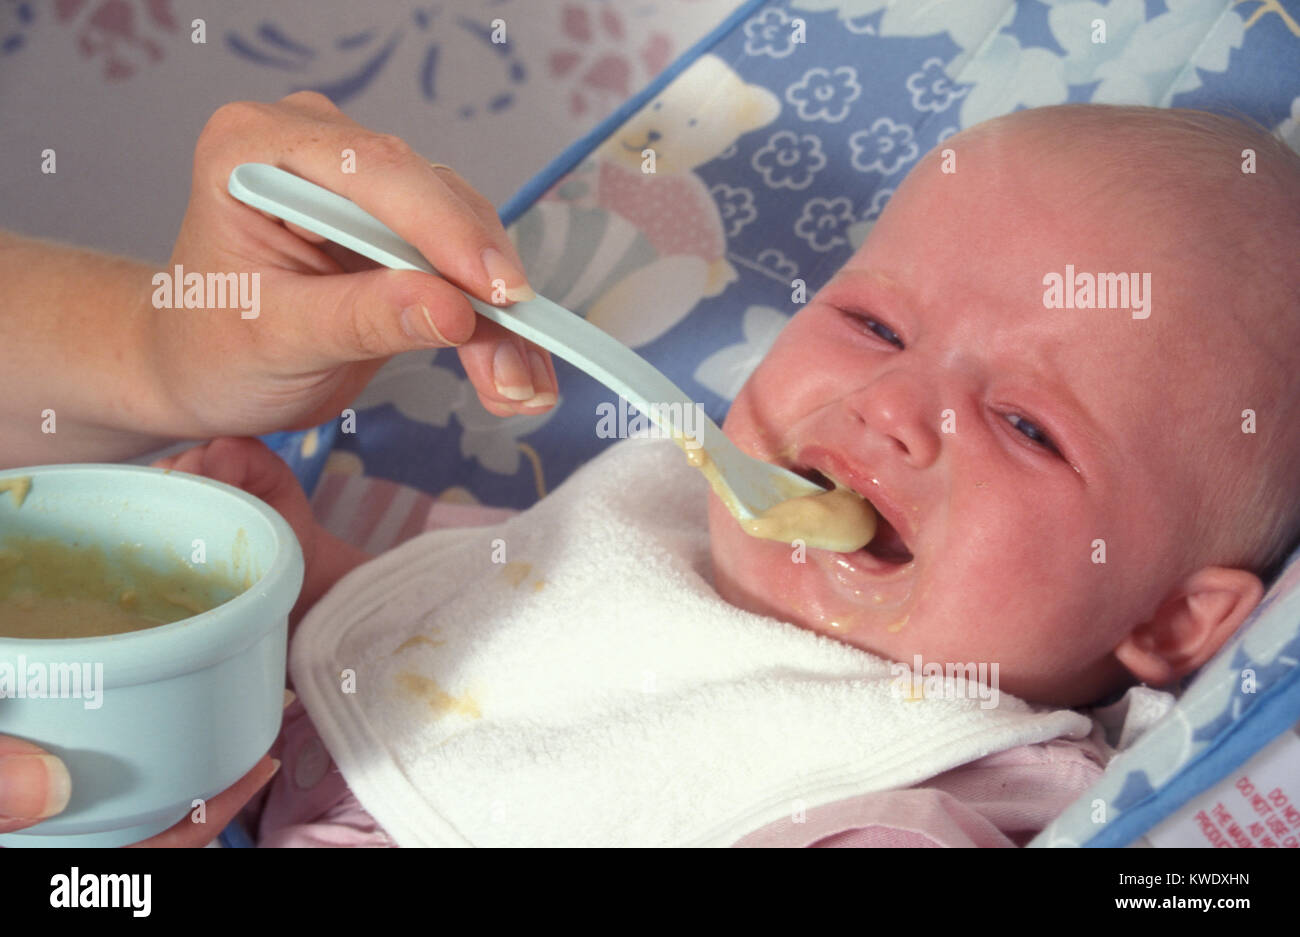 crying baby having her first feed Stock Photo